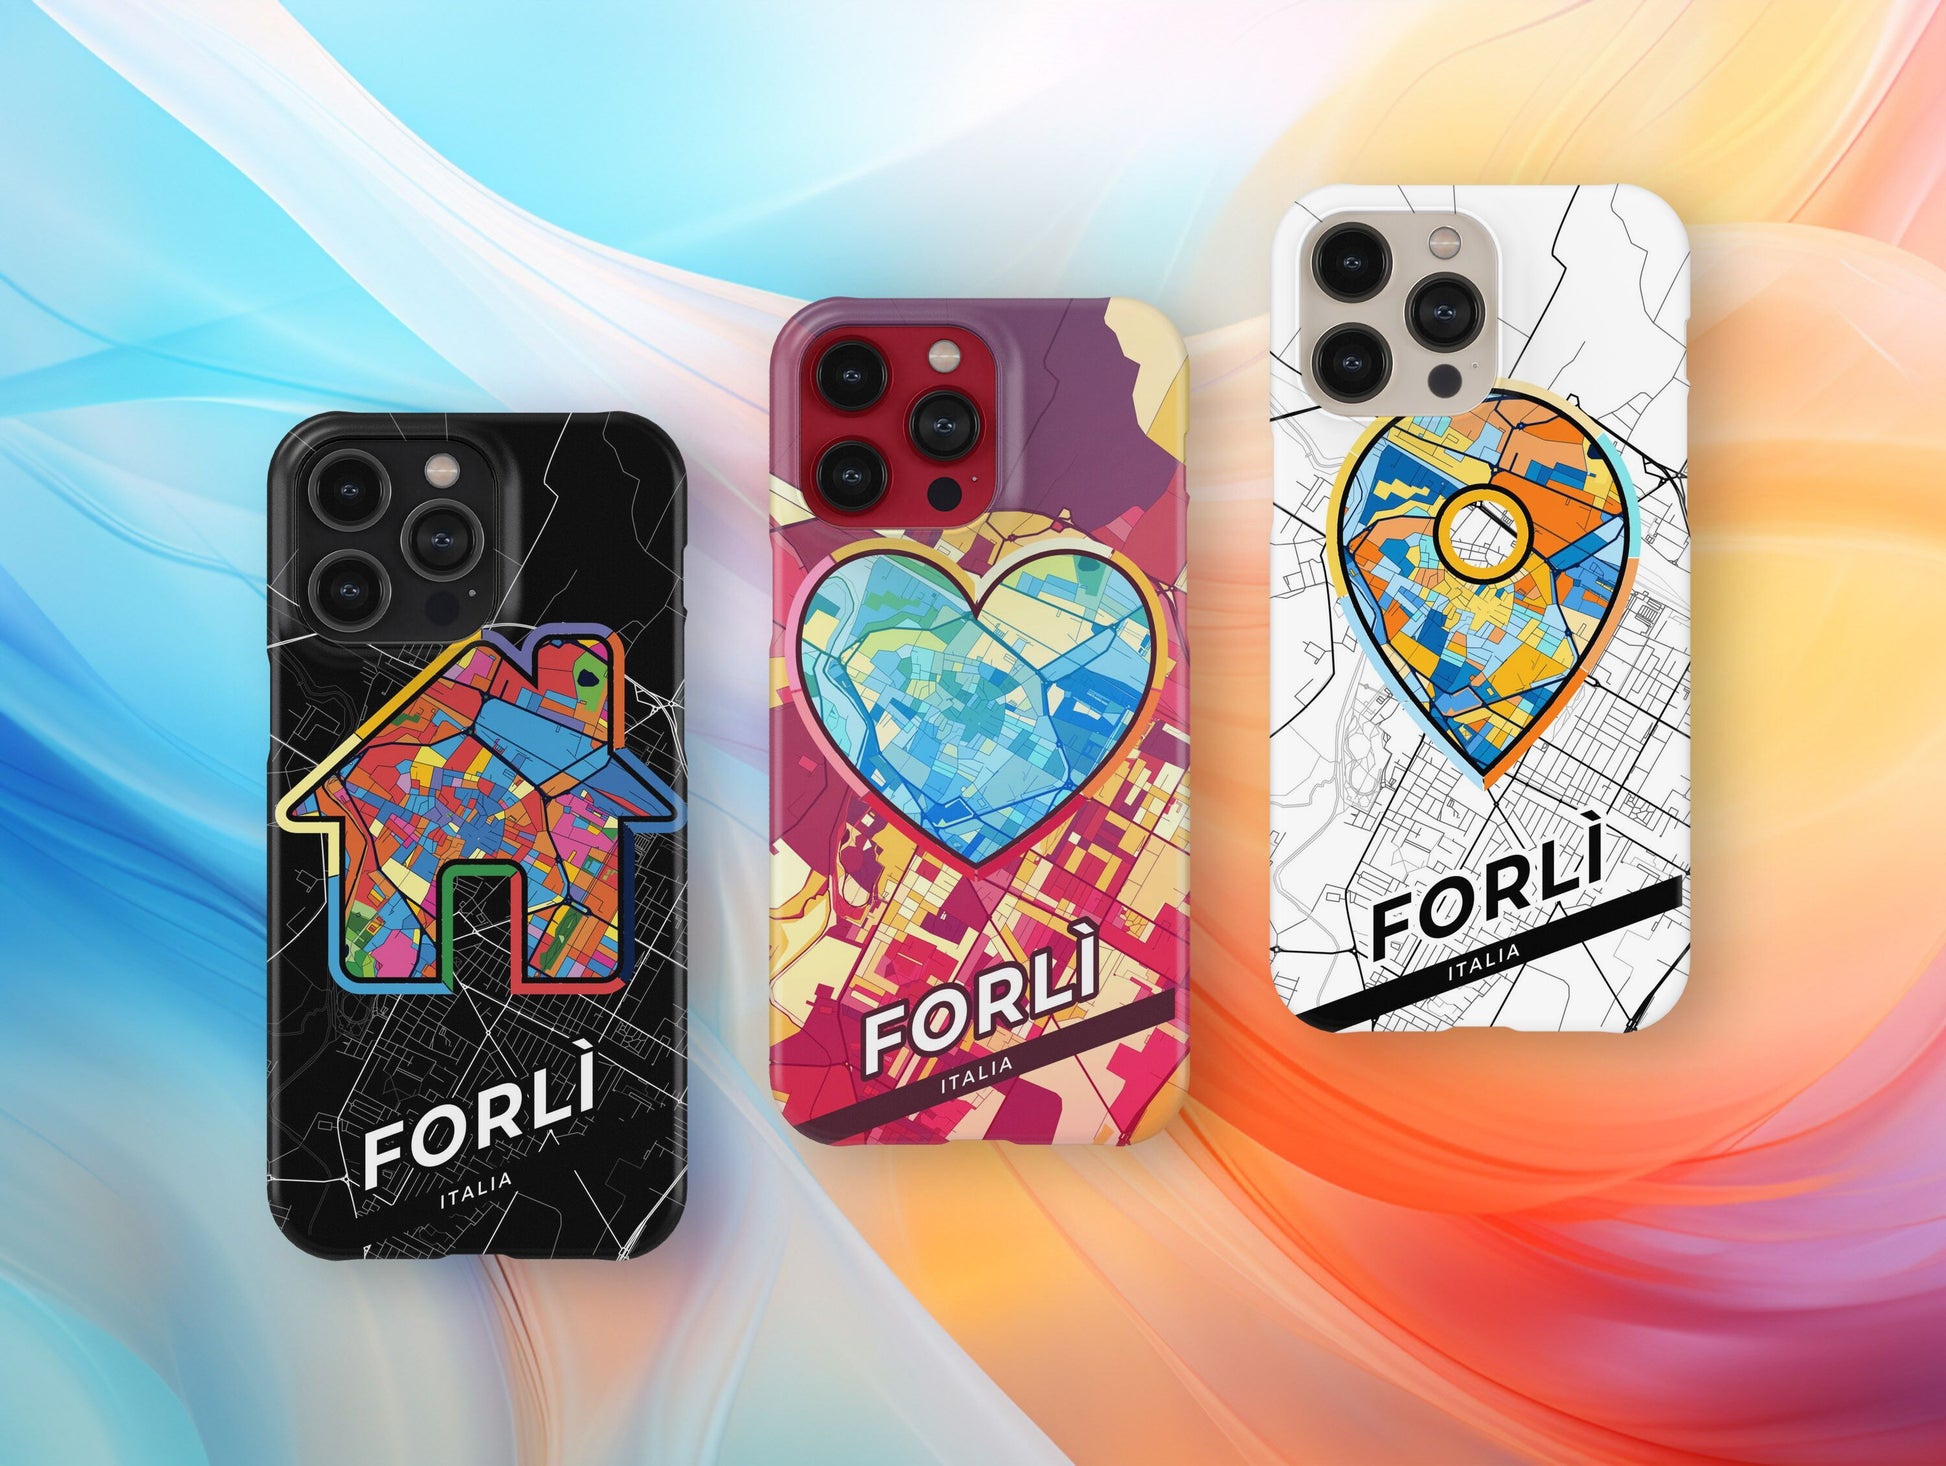 Forlì Italy slim phone case with colorful icon. Birthday, wedding or housewarming gift. Couple match cases.